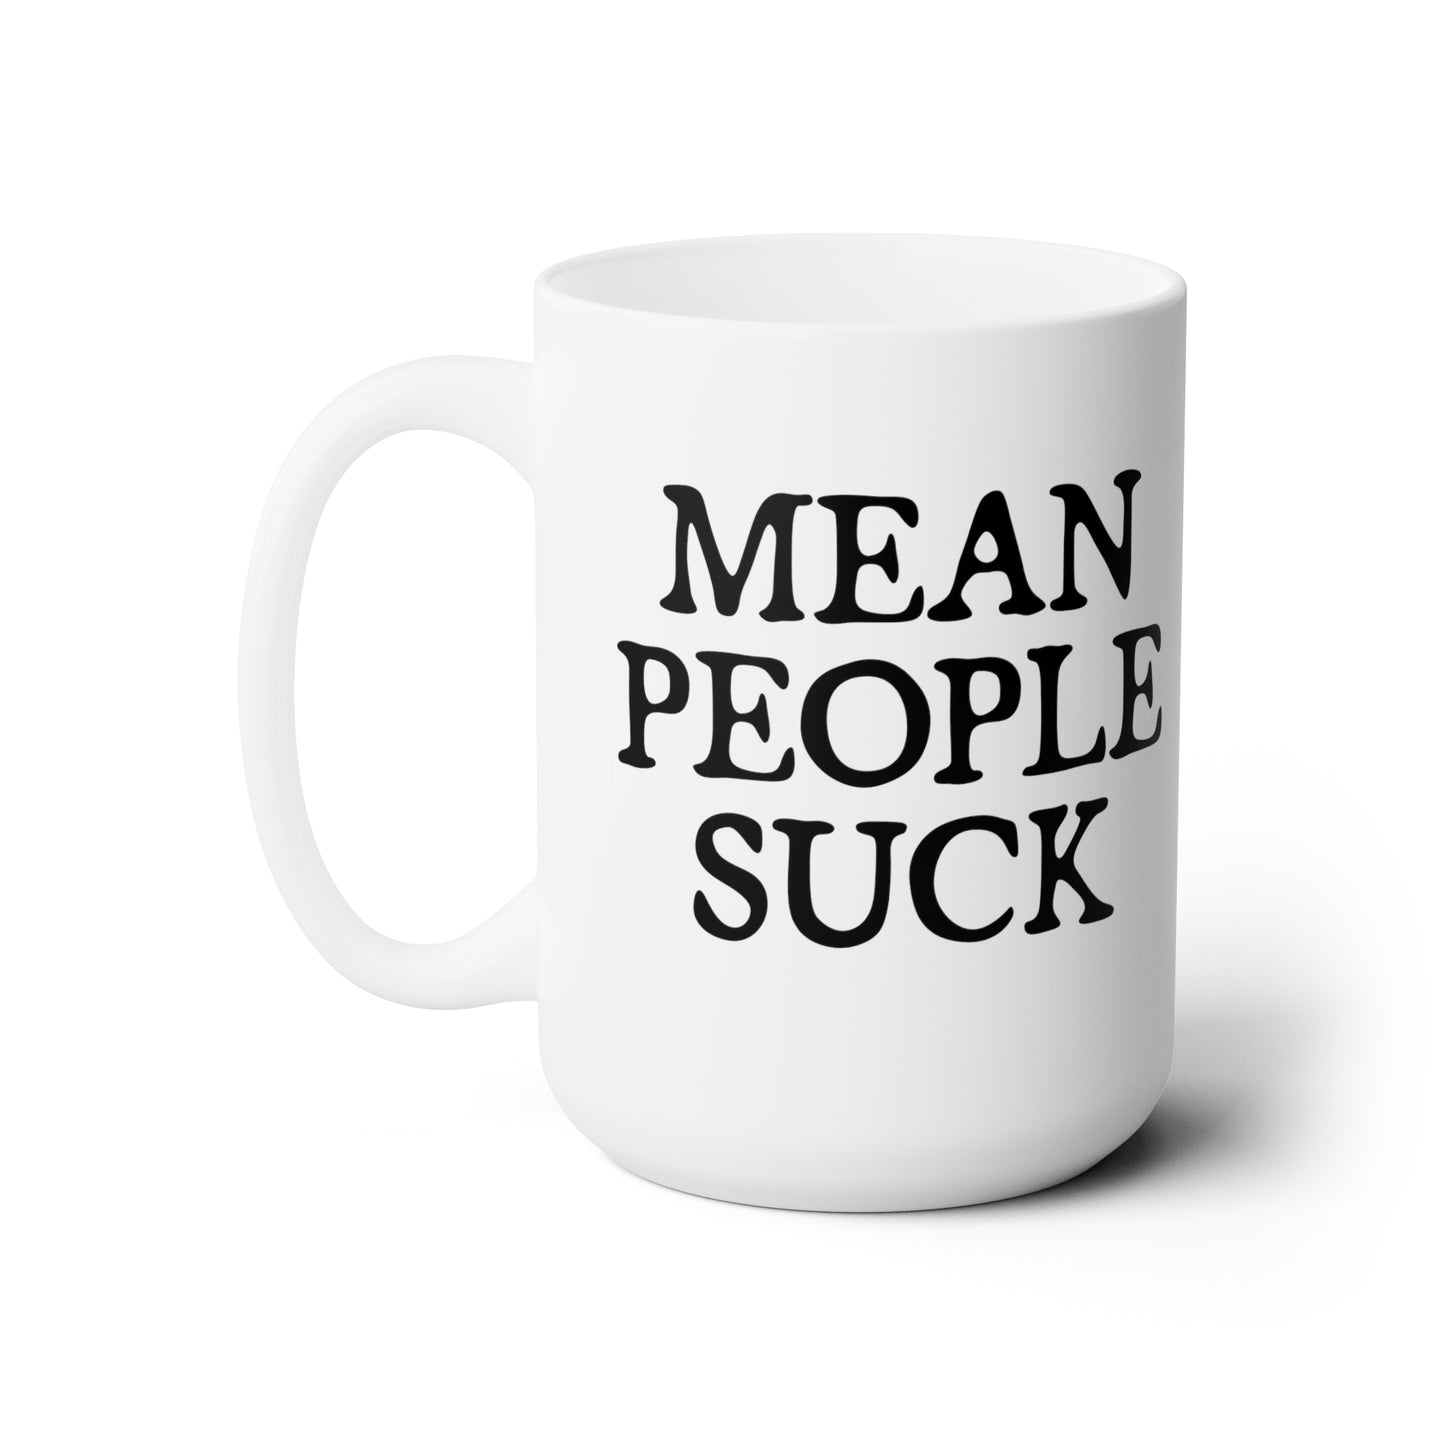 Mean People Suck Coffee Mug For Sarcastic Hot Tea Cup For Funny Gift Idea